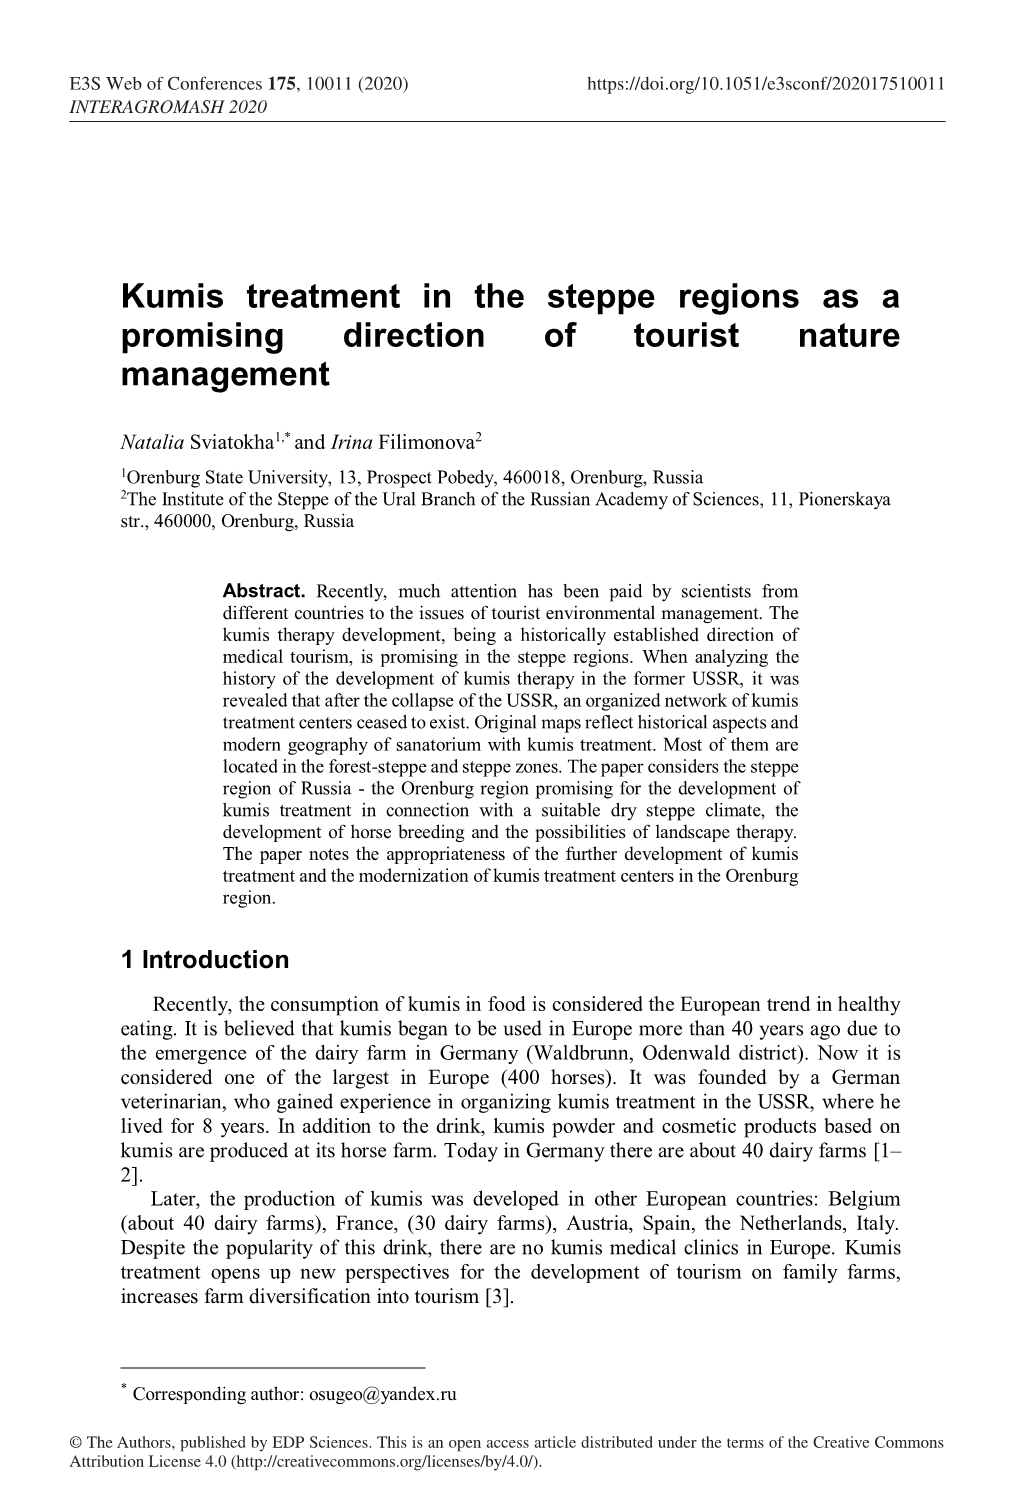 Kumis Treatment in the Steppe Regions As a Promising Direction of Tourist Nature Management